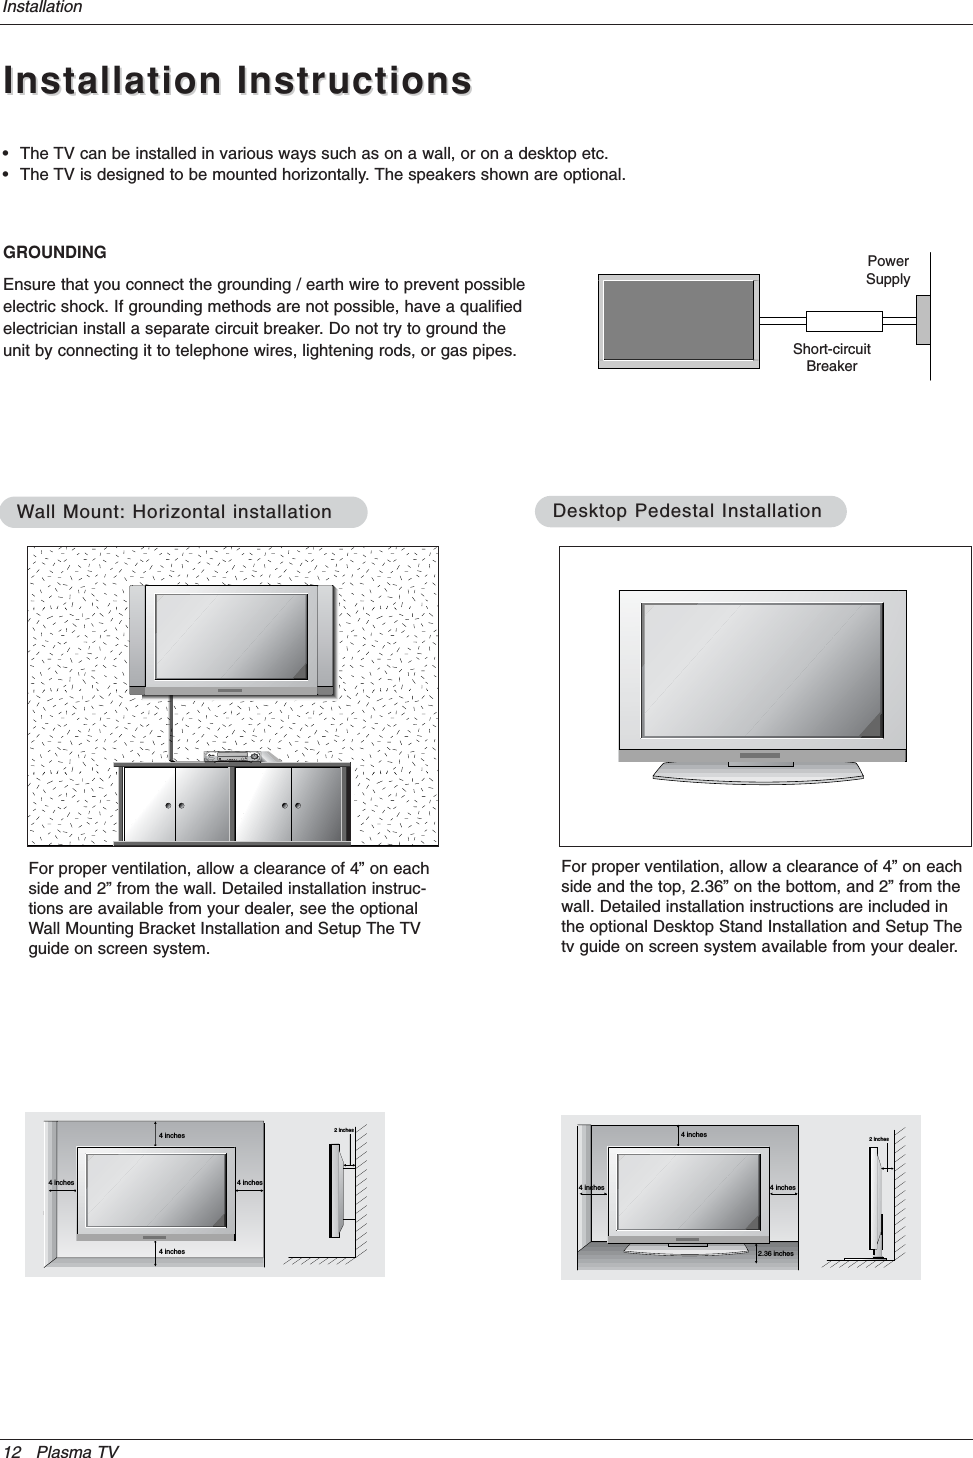 12 Plasma TVInstallationInstallation InstructionsInstallation Instructions• The TV can be installed in various ways such as on a wall, or on a desktop etc.• The TV is designed to be mounted horizontally. The speakers shown are optional.GROUNDINGEnsure that you connect the grounding / earth wire to prevent possibleelectric shock. If grounding methods are not possible, have a qualifiedelectrician install a separate circuit breaker. Do not try to ground theunit by connecting it to telephone wires, lightening rods, or gas pipes.PowerSupplyShort-circuitBreaker4 inches4 inches4 inches4 inches2 inchesWWall Mount: Horizontal installationall Mount: Horizontal installationFor proper ventilation, allow a clearance of 4” on eachside and 2” from the wall. Detailed installation instruc-tions are available from your dealer, see the optionalWall Mounting Bracket Installation and Setup The TVguide on screen system.4 inches4 inches2.36 inches4 inches2 inchesDesktop Pedestal InstallationDesktop Pedestal InstallationFor proper ventilation, allow a clearance of 4” on eachside and the top, 2.36” on the bottom, and 2” from thewall. Detailed installation instructions are included inthe optional Desktop Stand Installation and Setup Thetv guide on screen system available from your dealer.